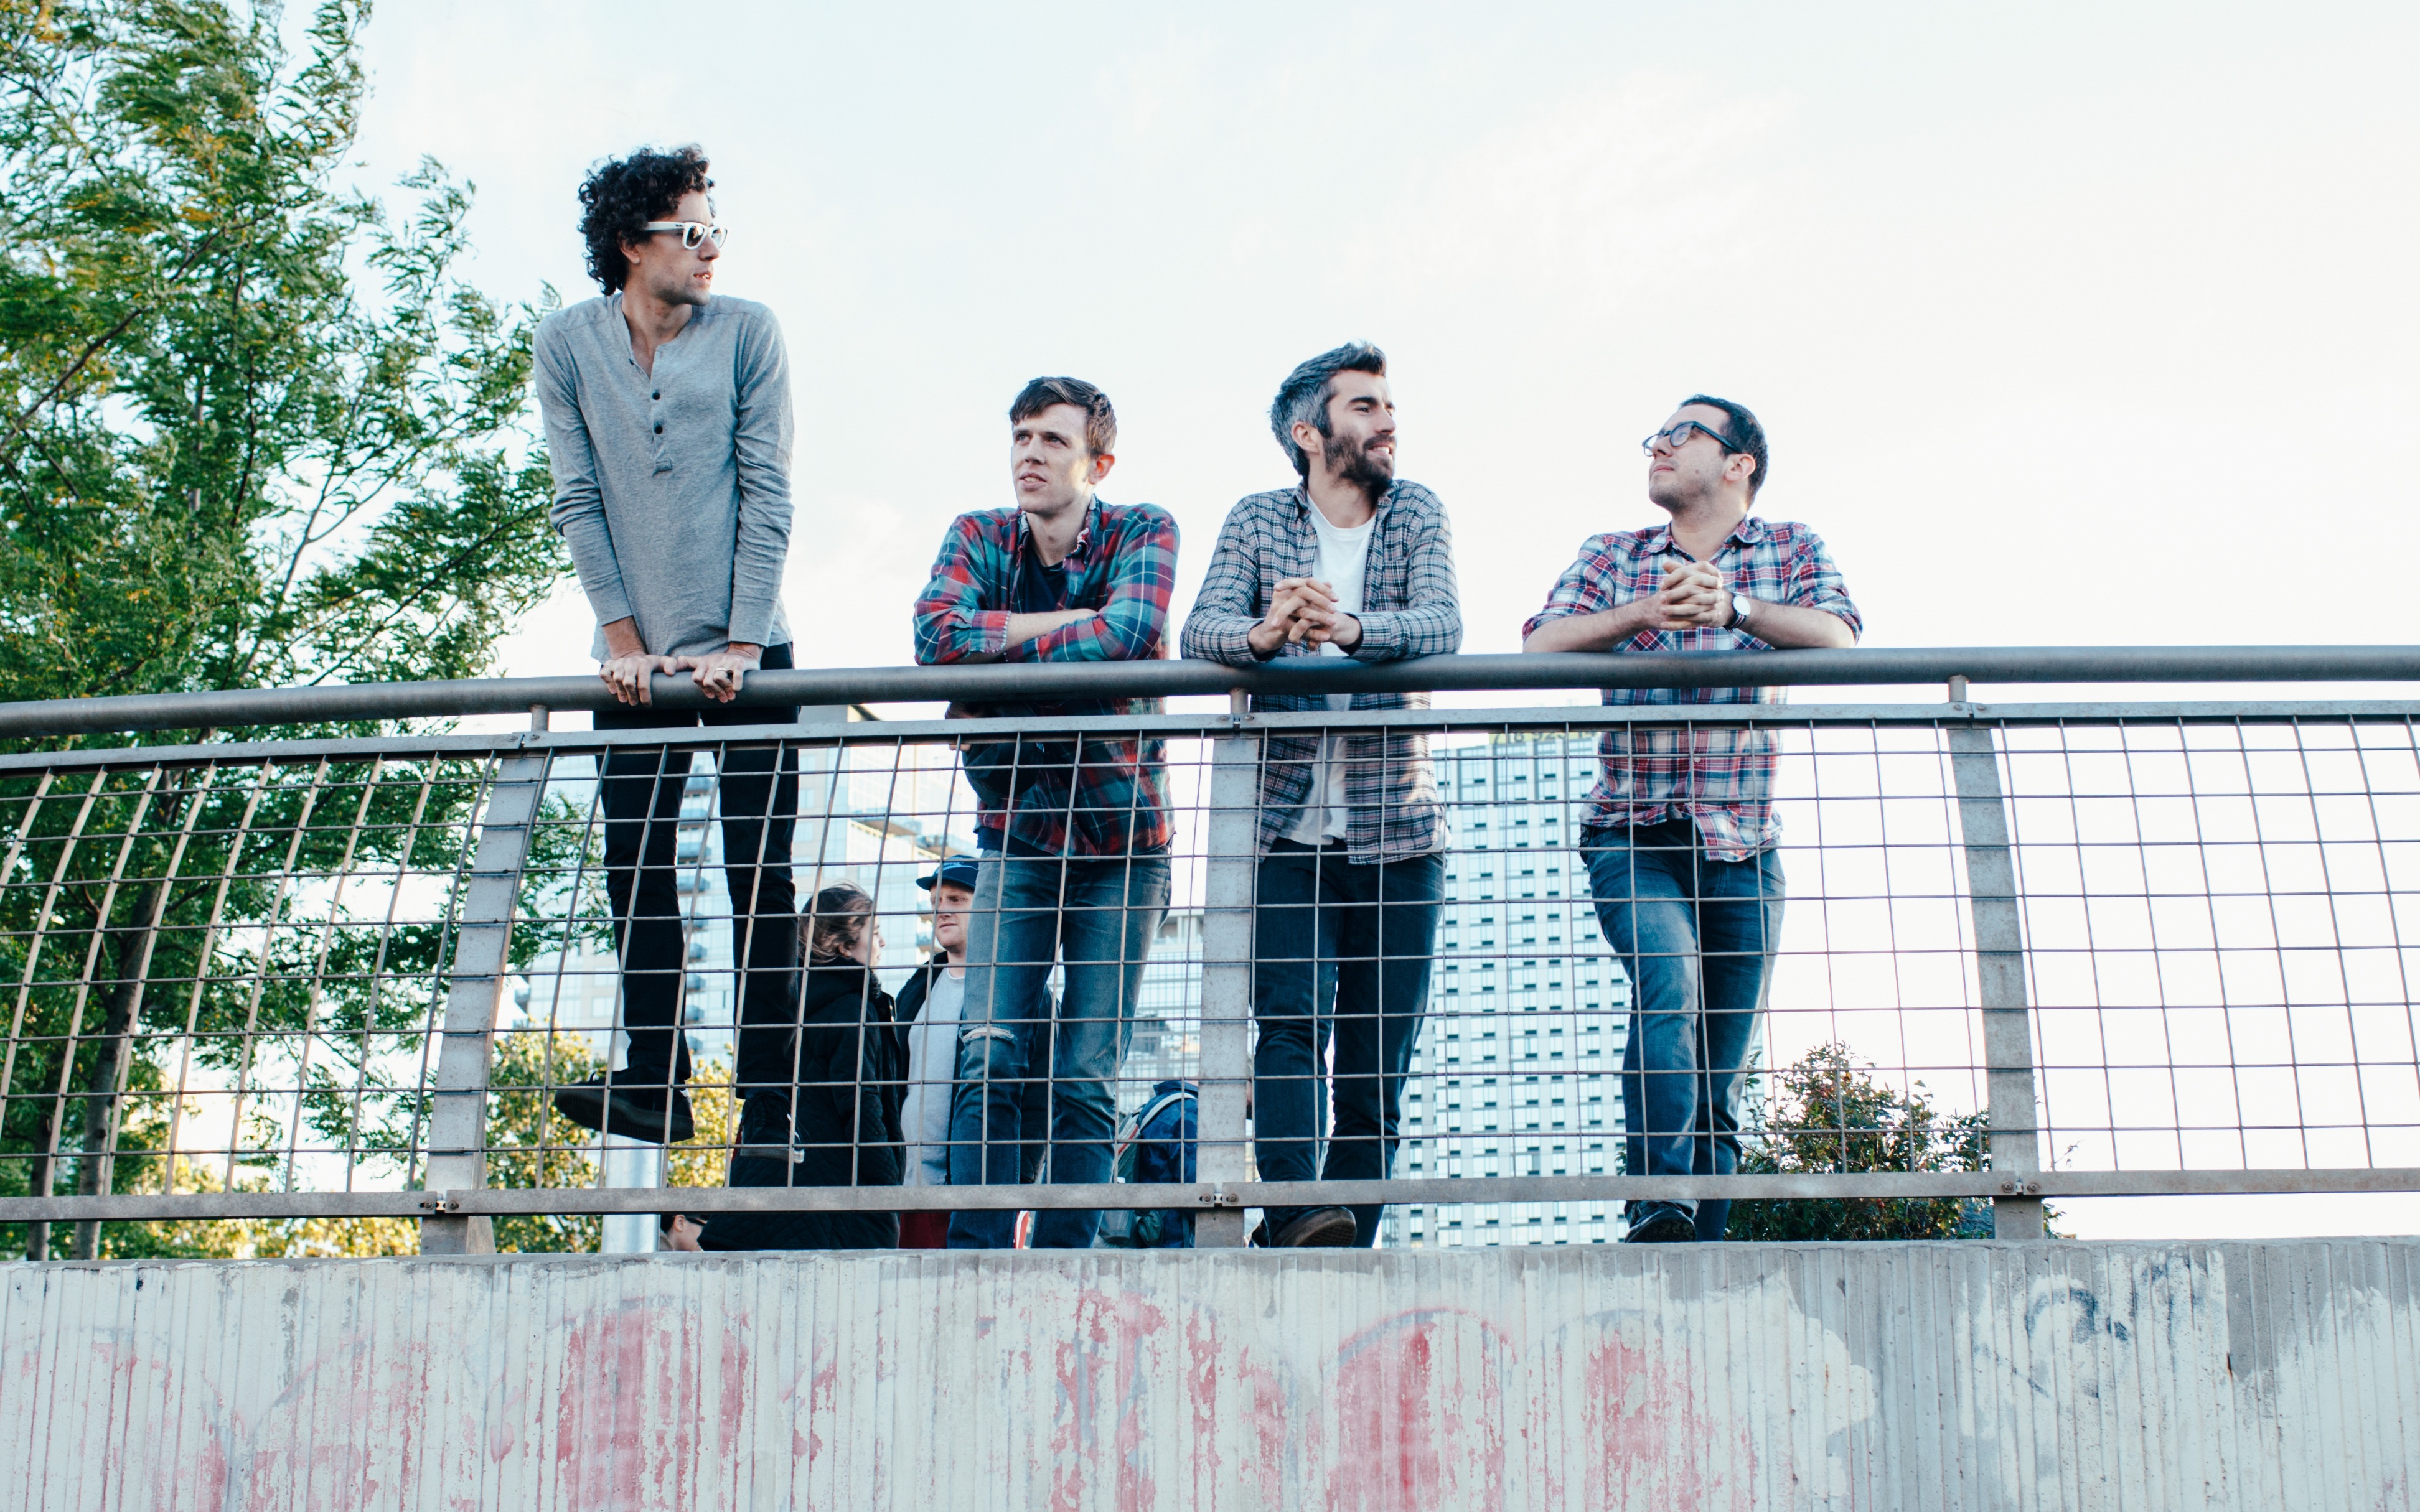 UNIQUE SOUNDS - Toronto-based band Tokyo Police Club makes a Red Deer stop at Bo’s Bar and Grill on Sept. 29th.